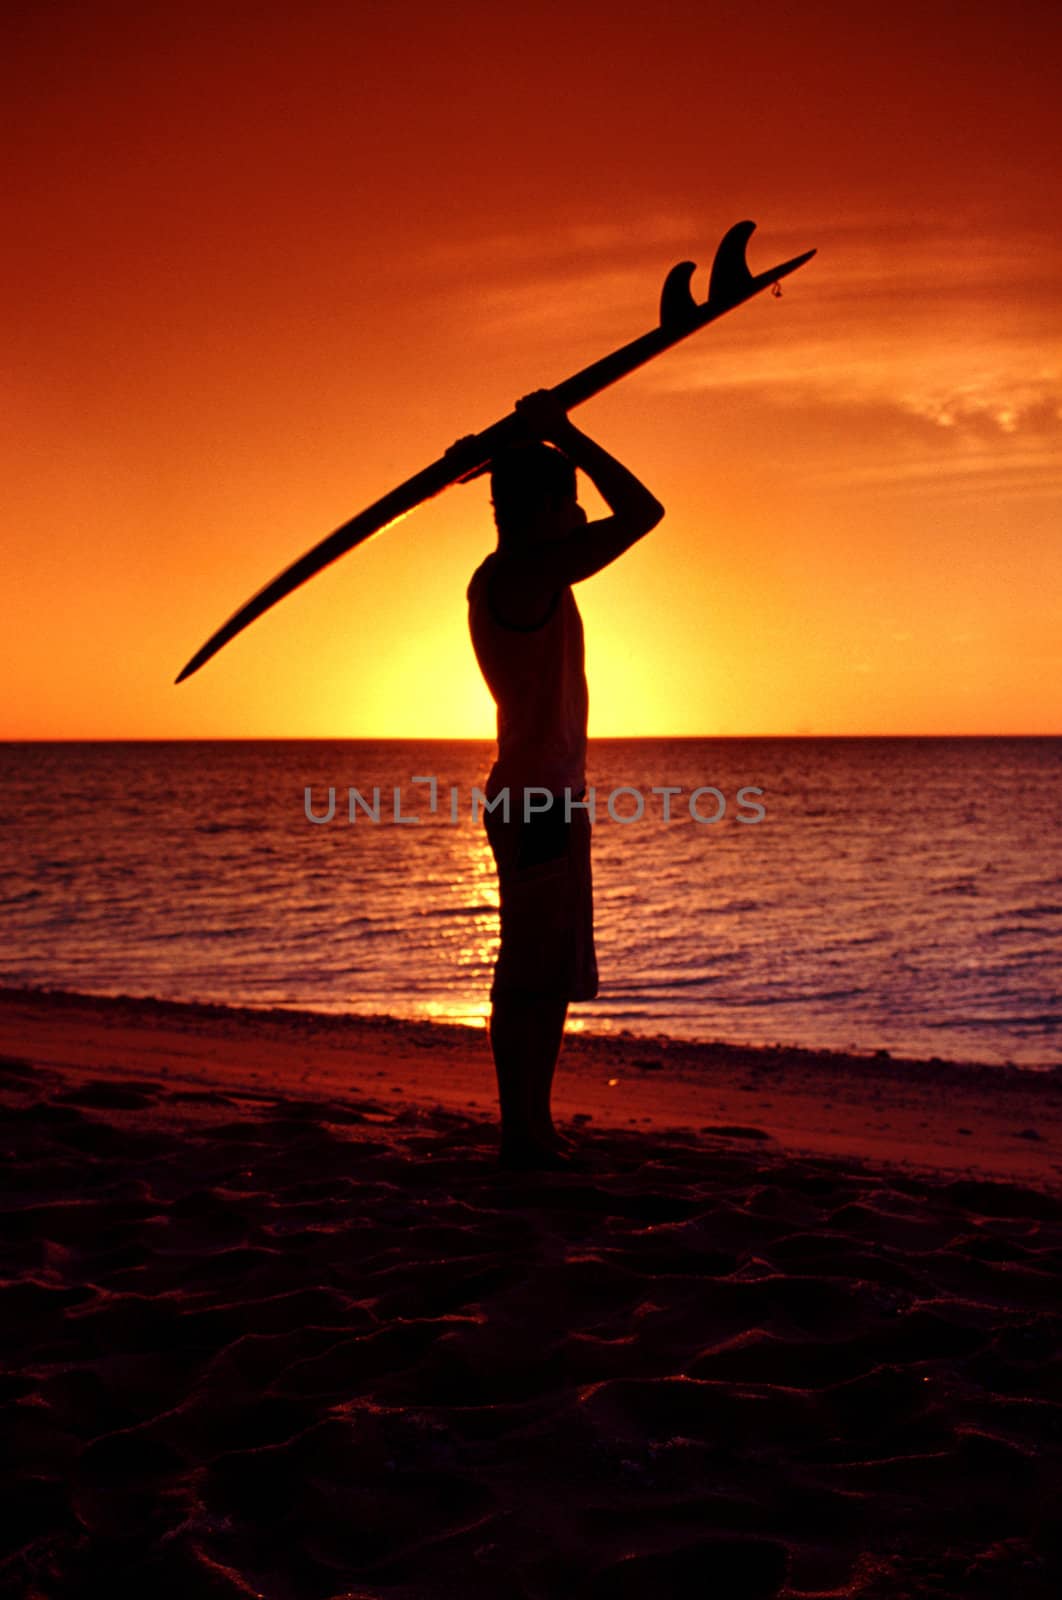 Surfing and sunrise by ftlaudgirl